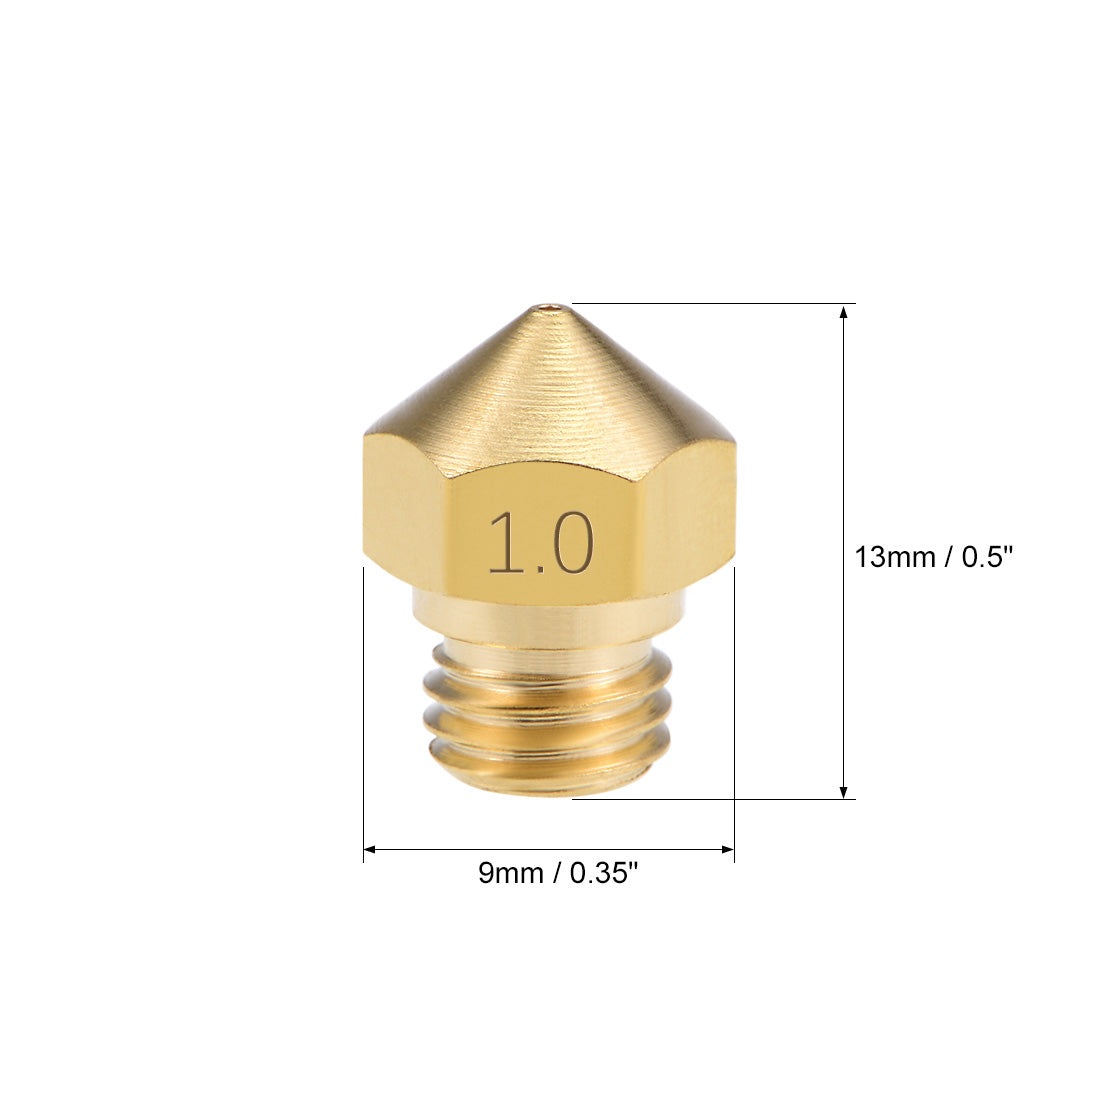 uxcell Uxcell 1mm 3D Printer Nozzle Head M7 Thread Replacement for MK10 1.75mm Extruder Print, Brass 5pcs